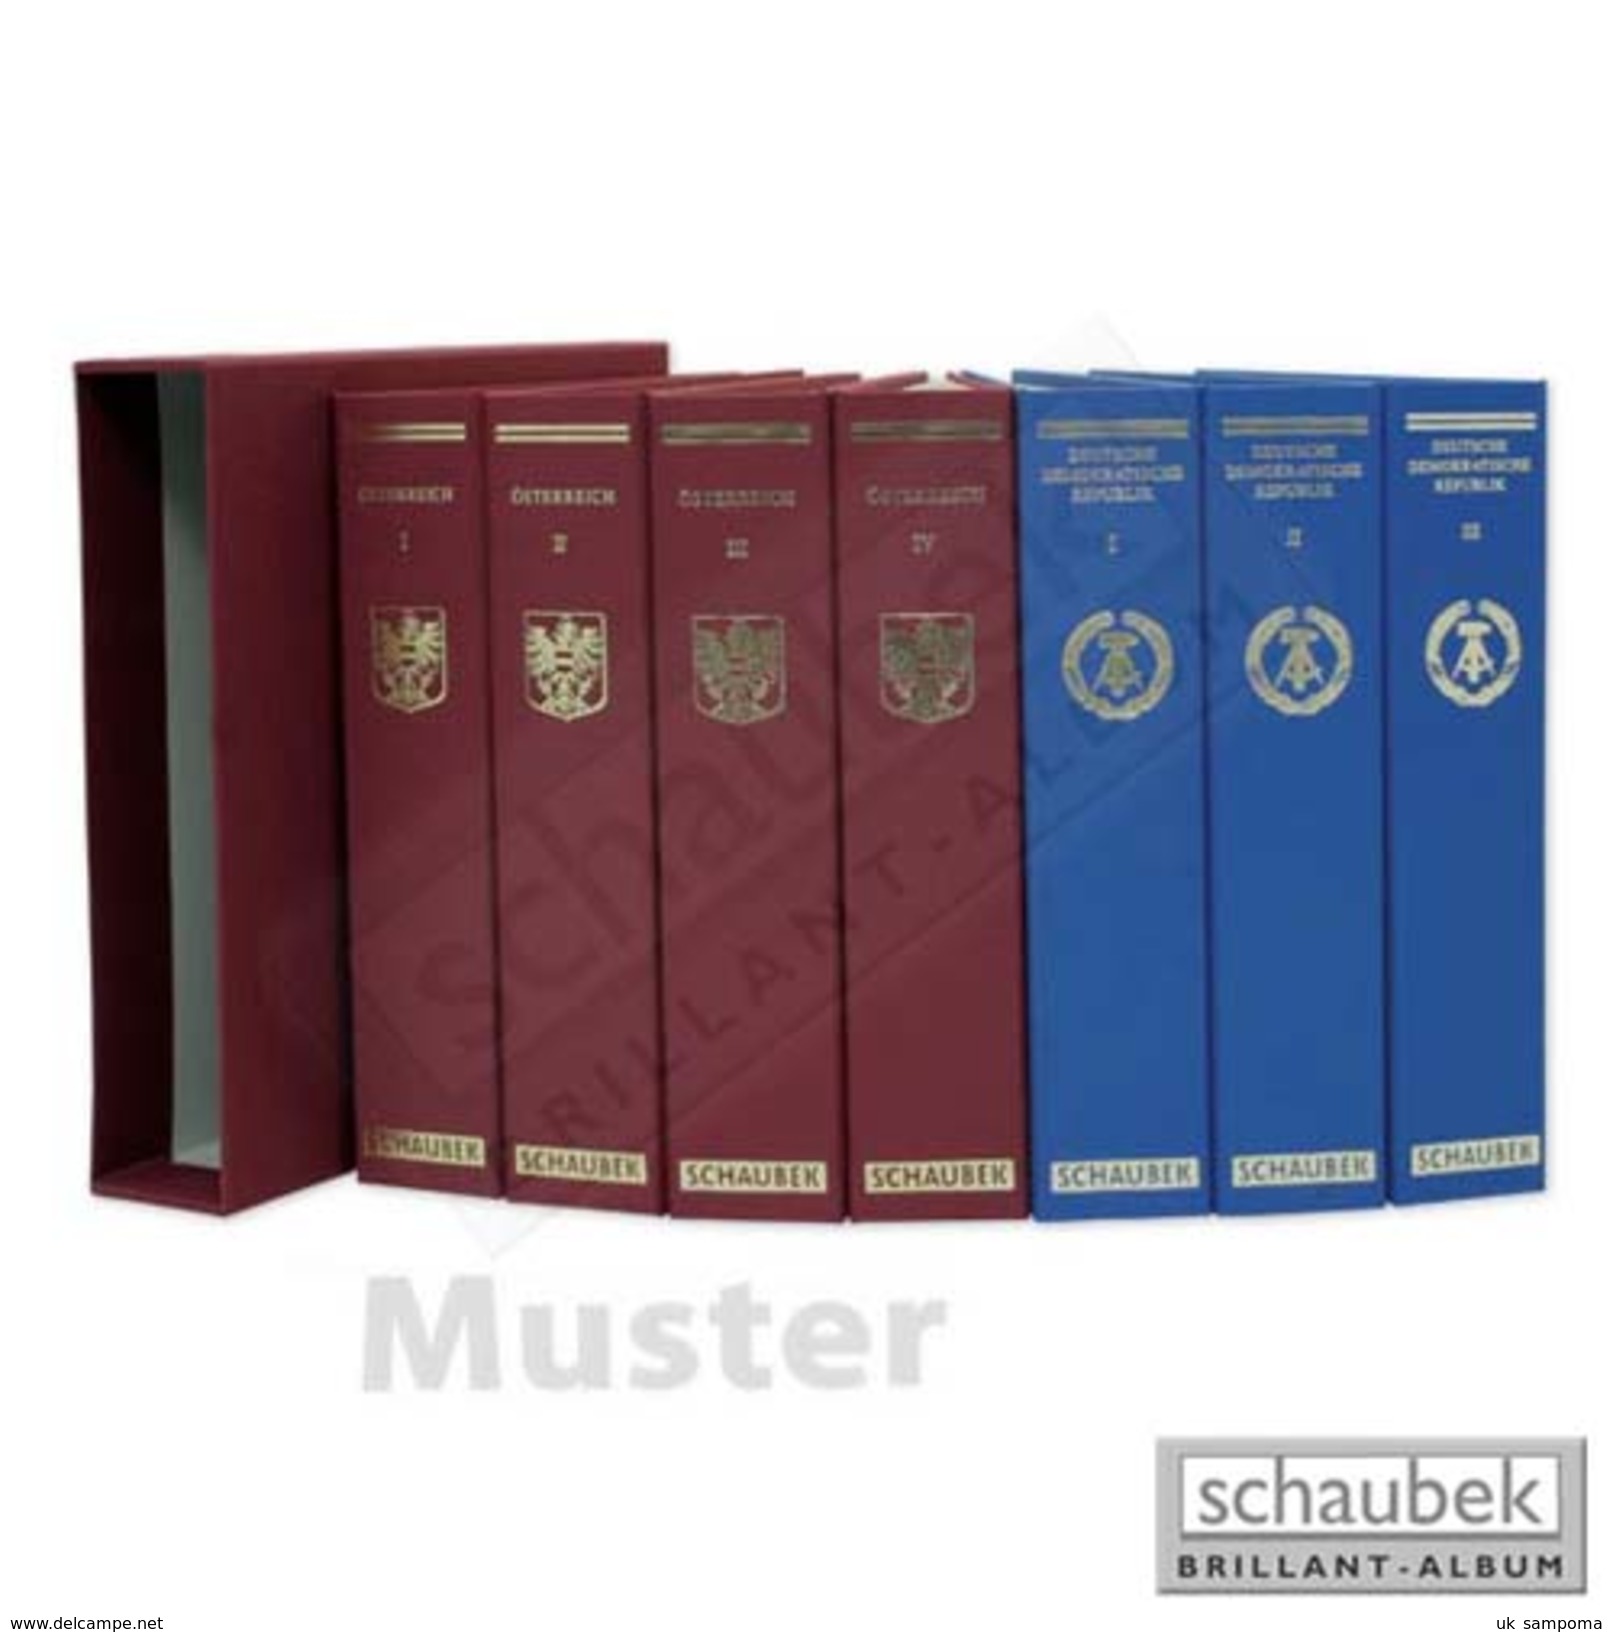 Schaubek A-807/04N Album Czechoslovakia 1970-1979 Standard, In A Blue Screw Post Binder, Vol. IV, Without Slipcase - Binders With Pages